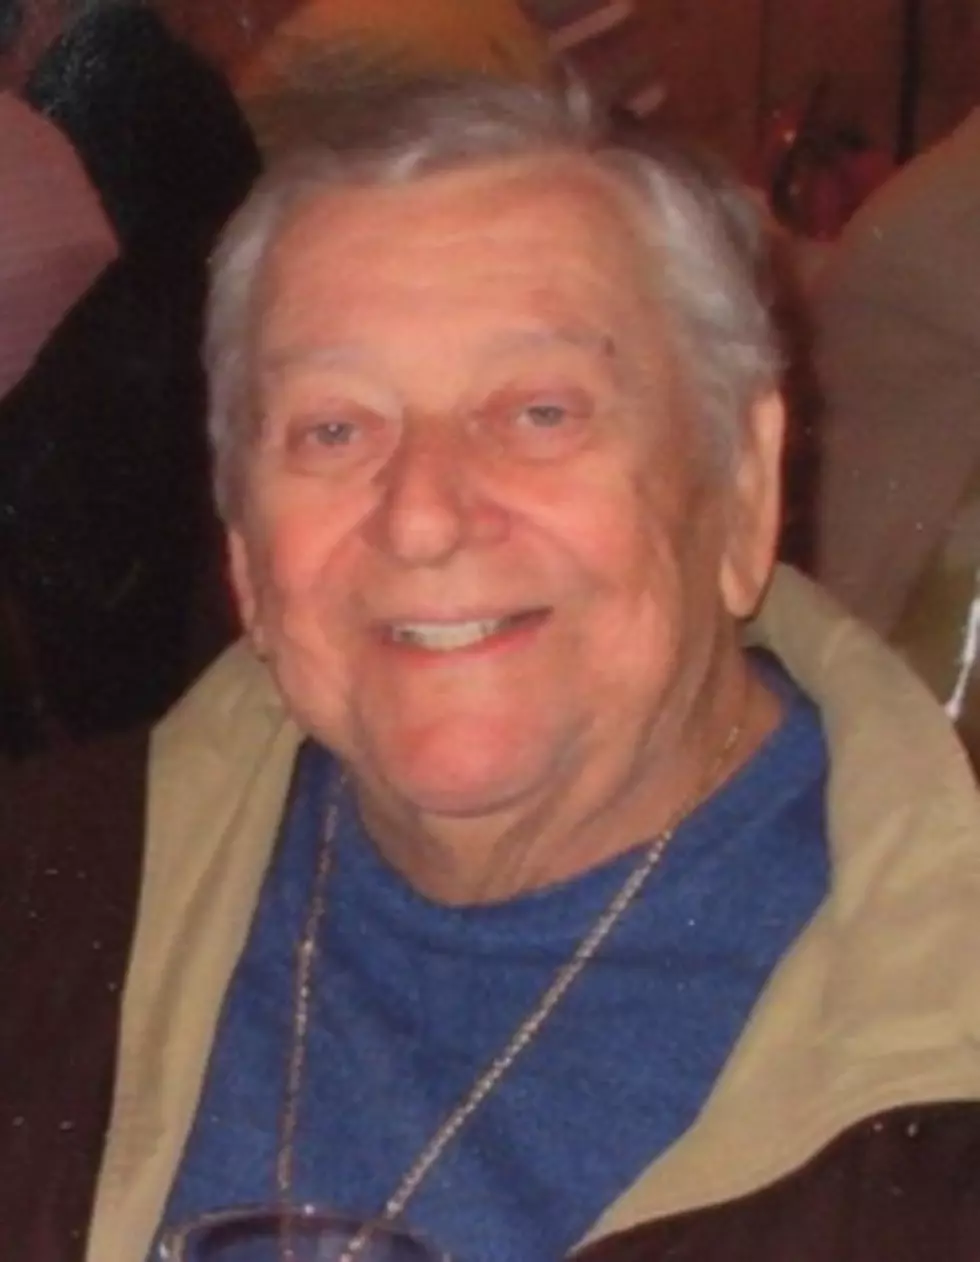 Dwight C. Aller, an Area Resident, Dies at 83